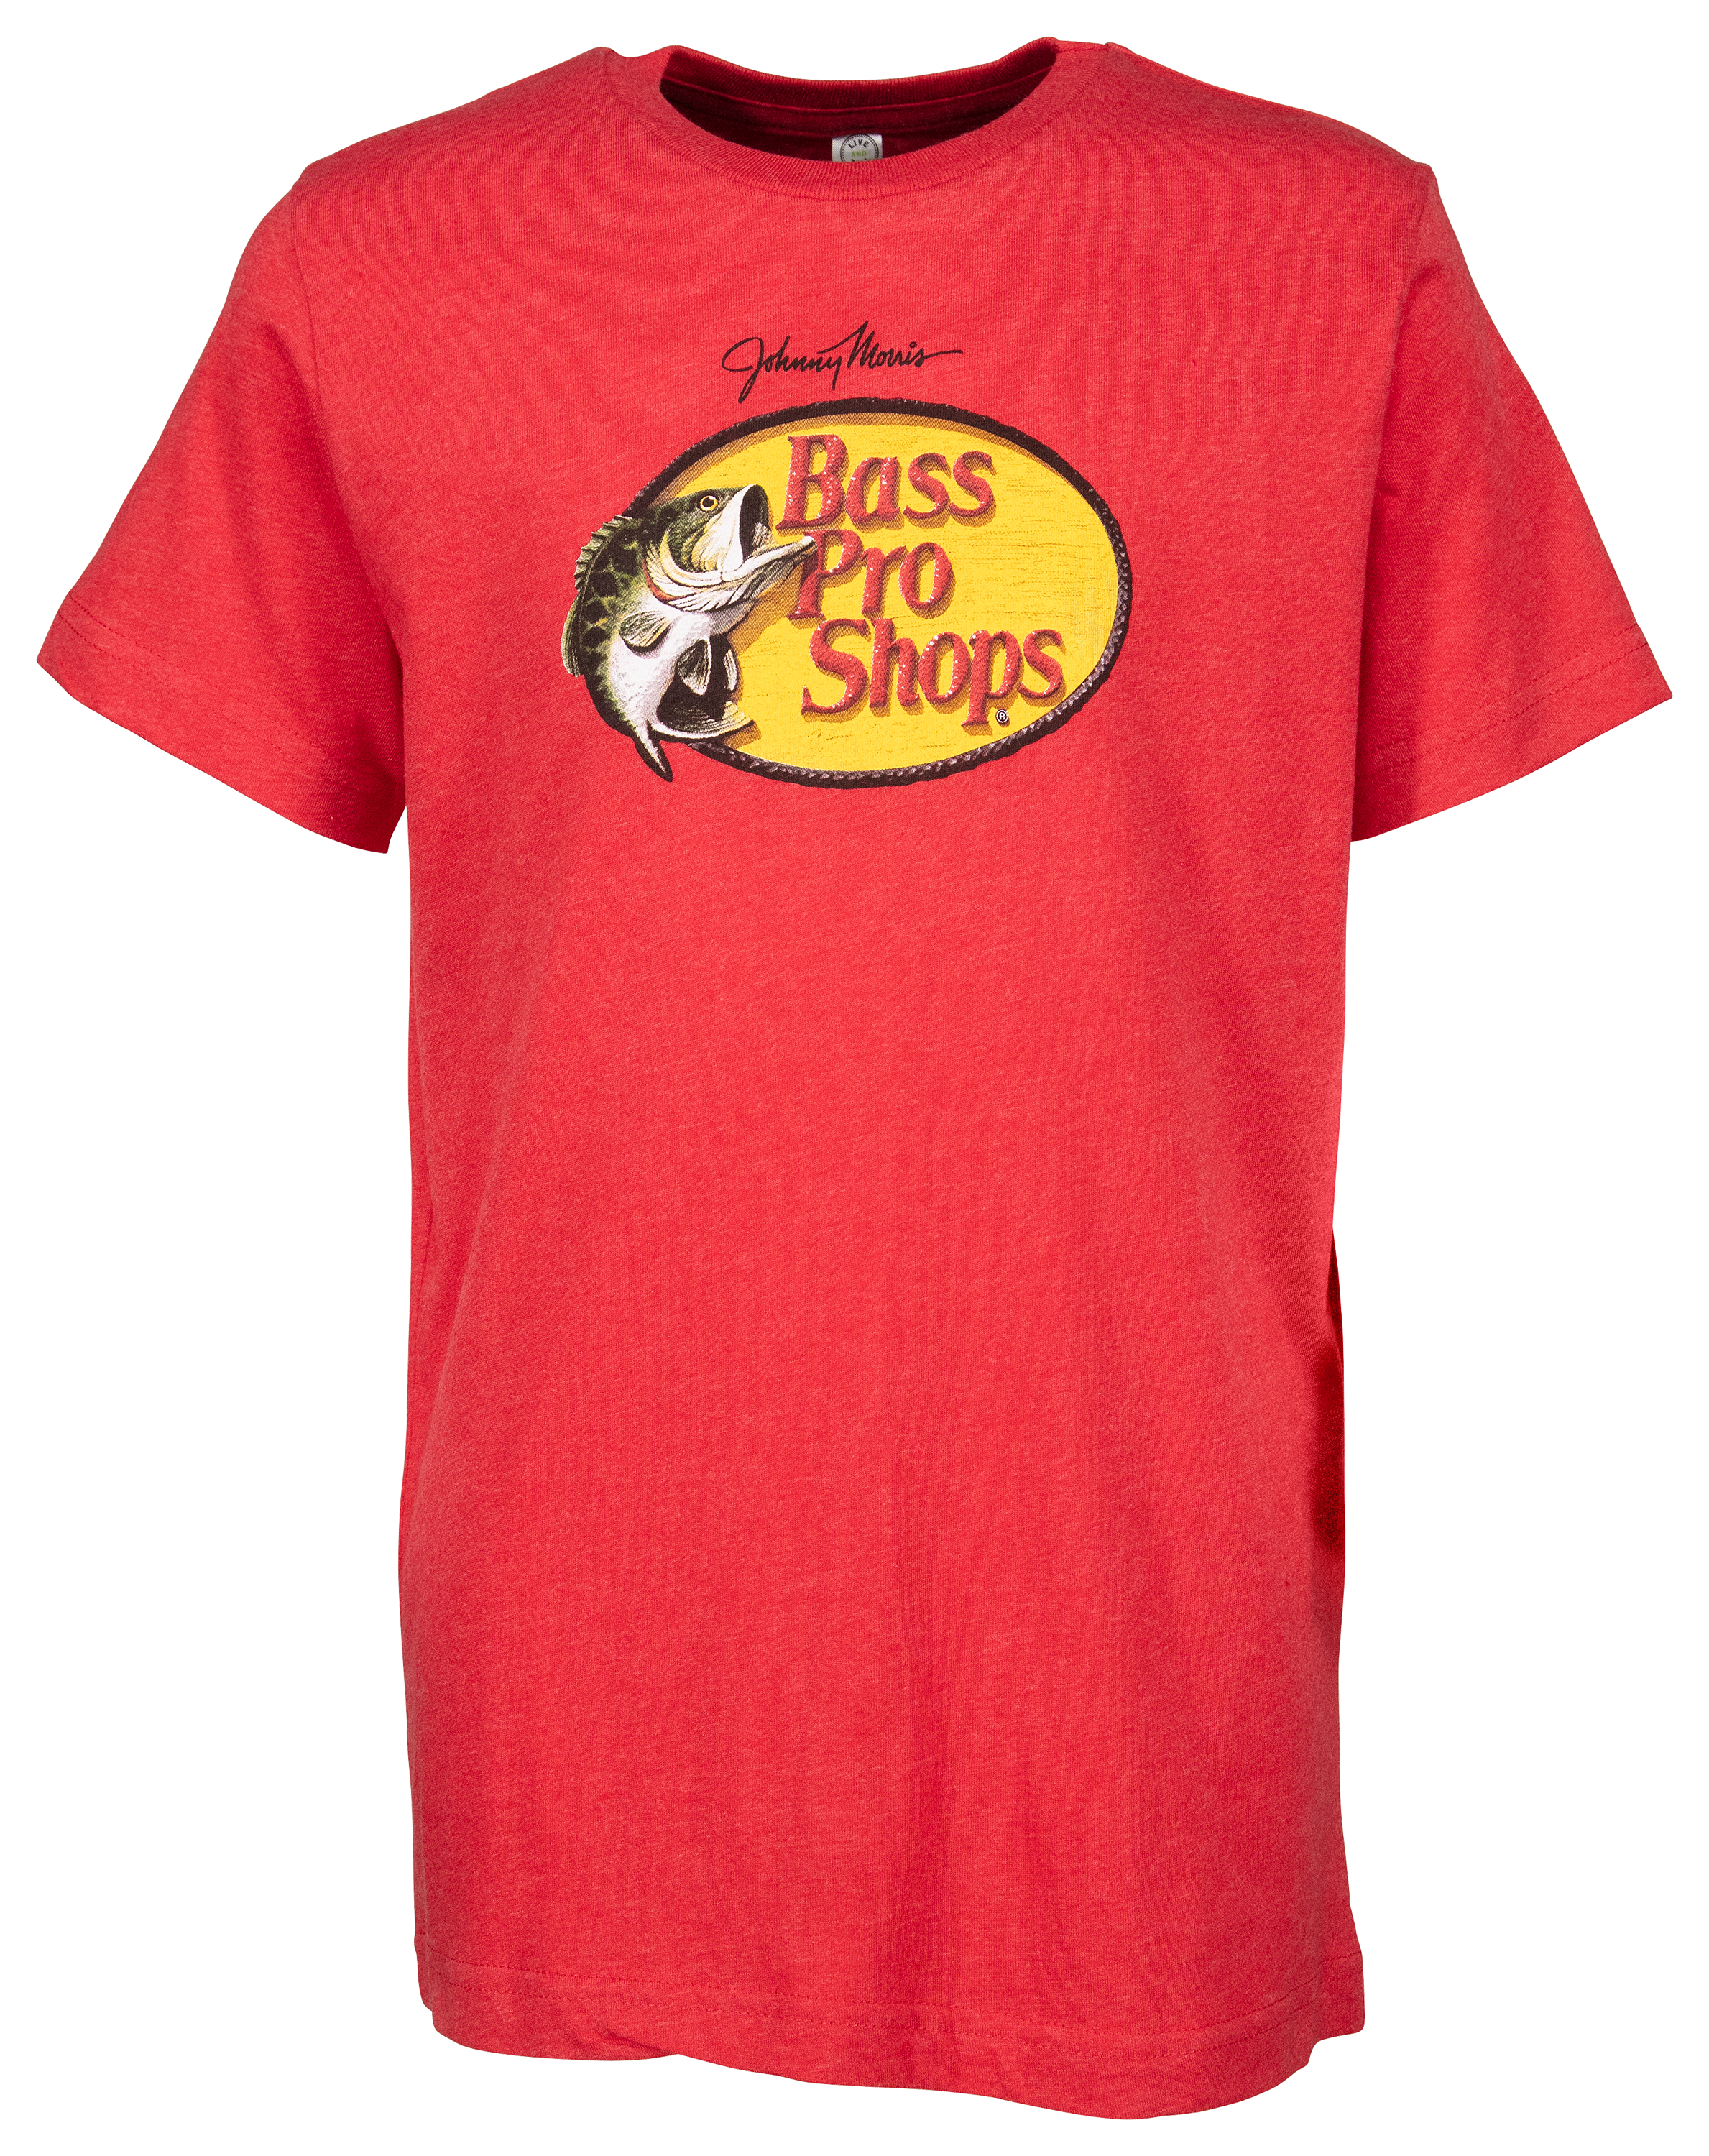 Bass Pro Shops Johnny Morris Woodcut Logo Short-Sleeve T-Shirt for Toddlers  or Kids